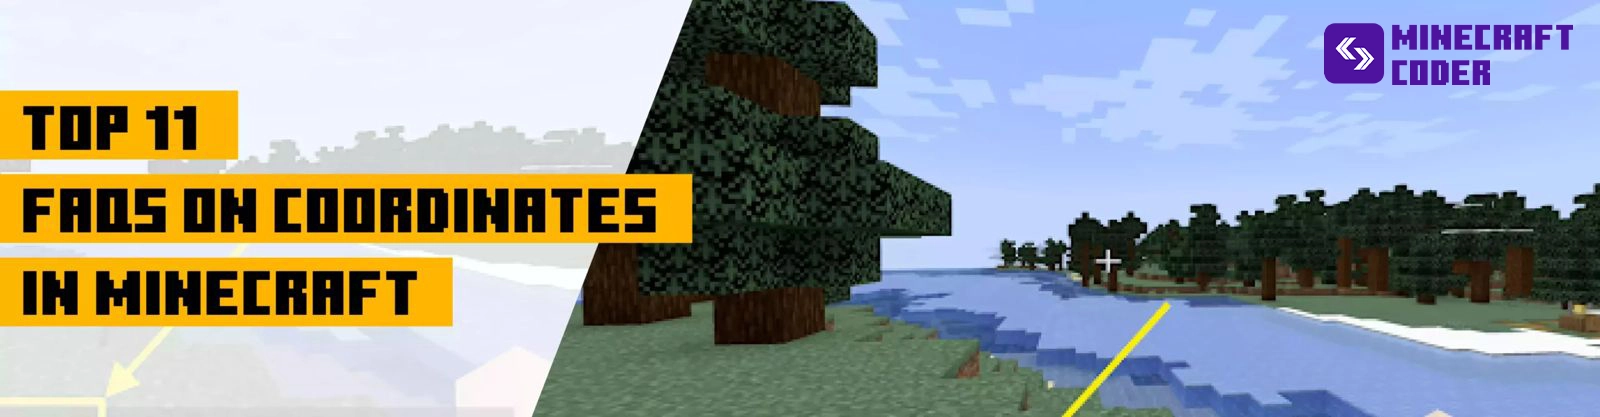 Top 11 FAQs on Coordinates in Minecraft